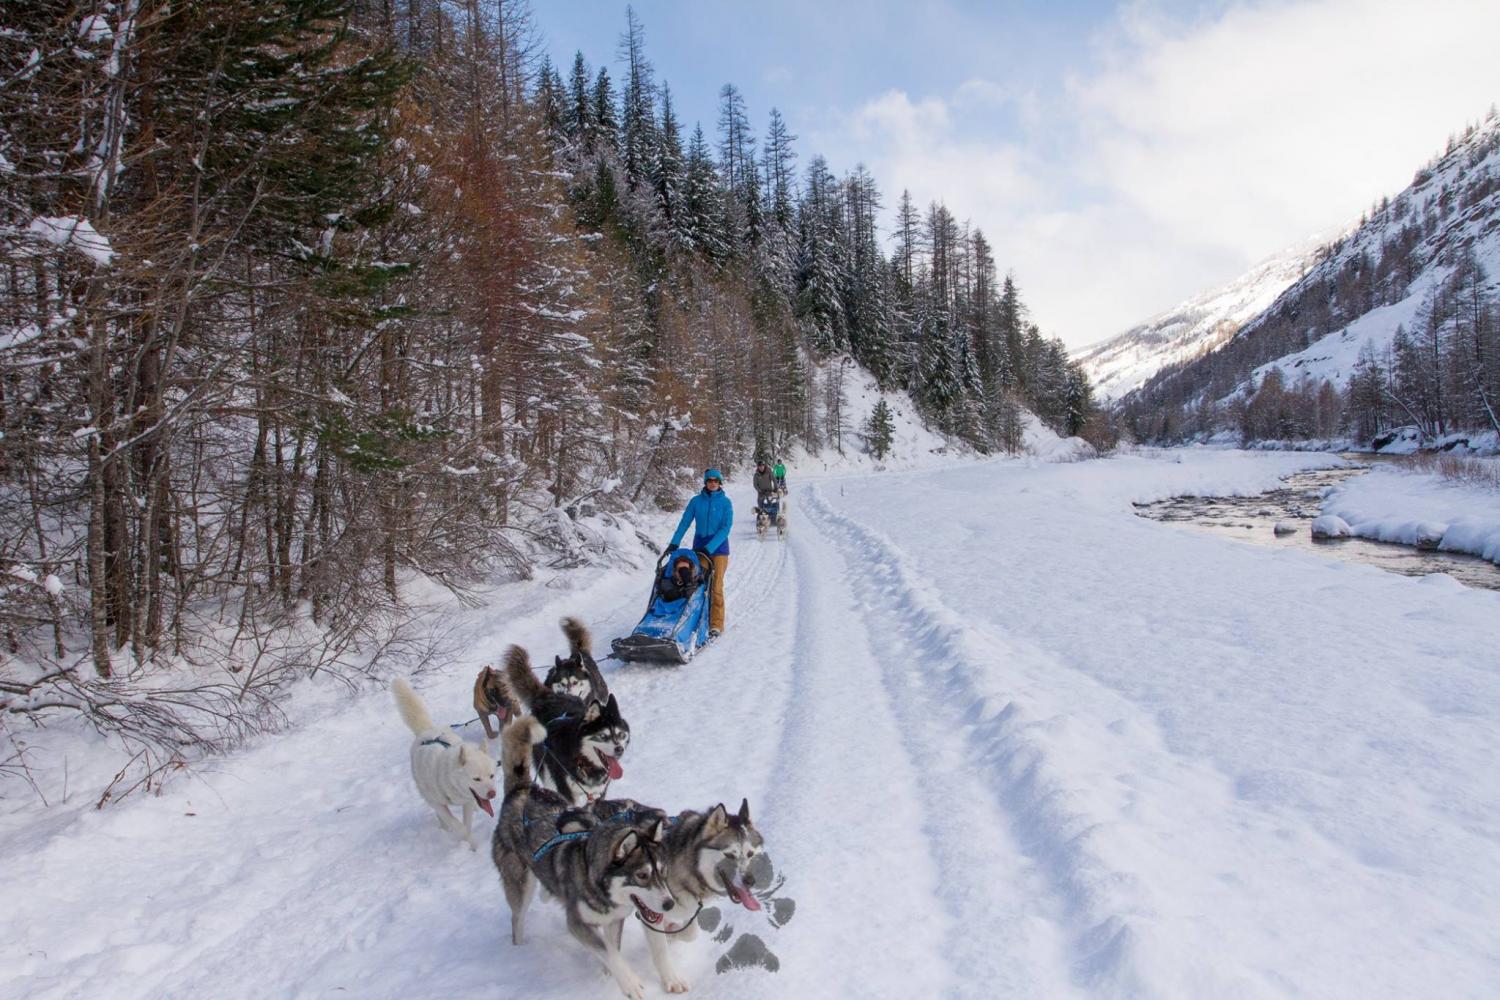 Dogsledding experience (harnessing, riding and driving)